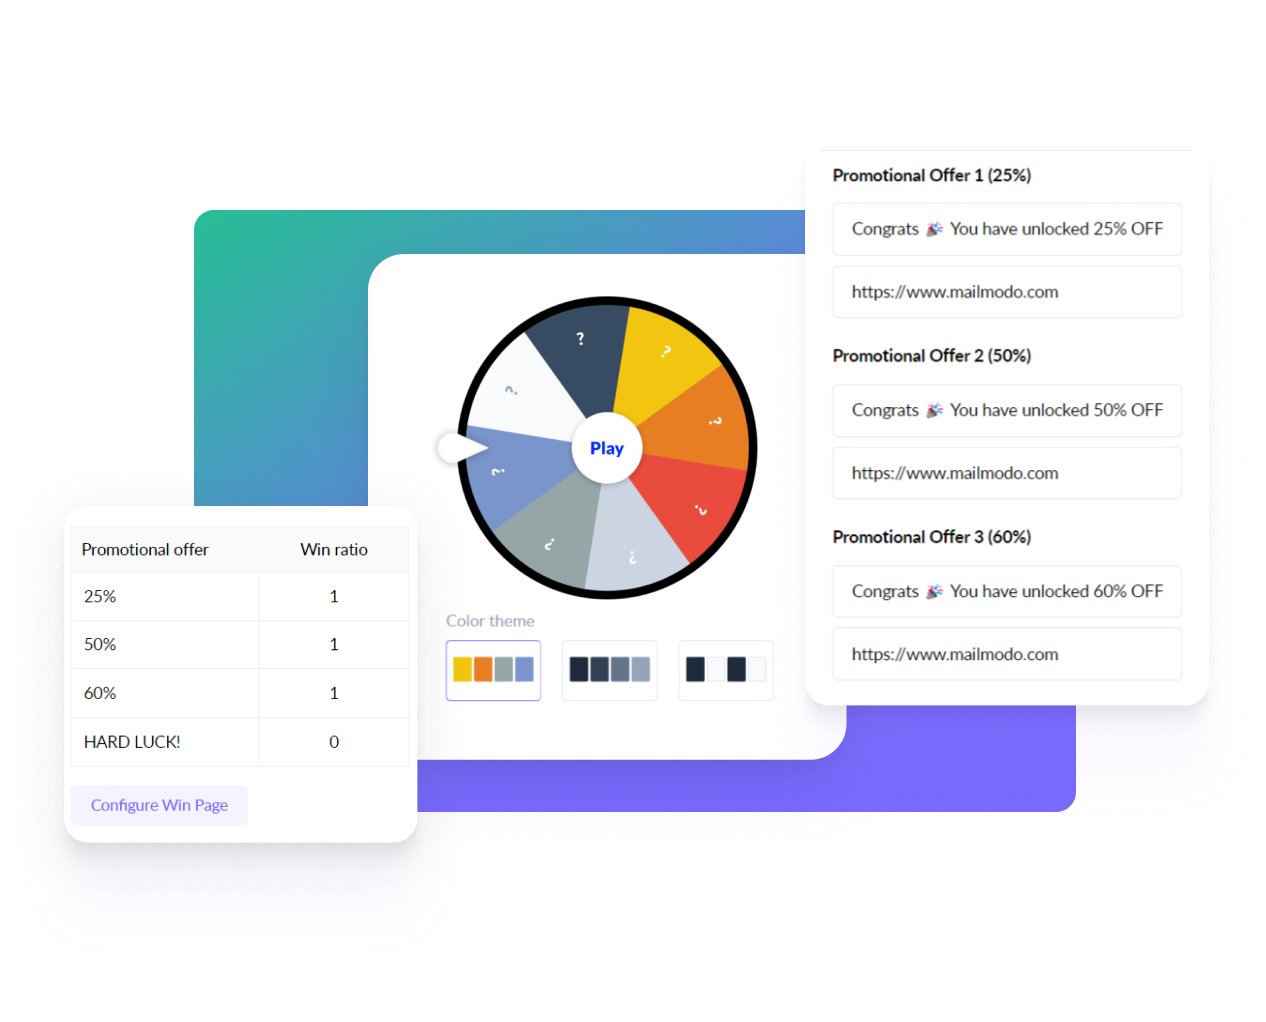 Mailmodo offers drag and drop option to make a discount wheel for your interactive emails, which will bring you great conversion.